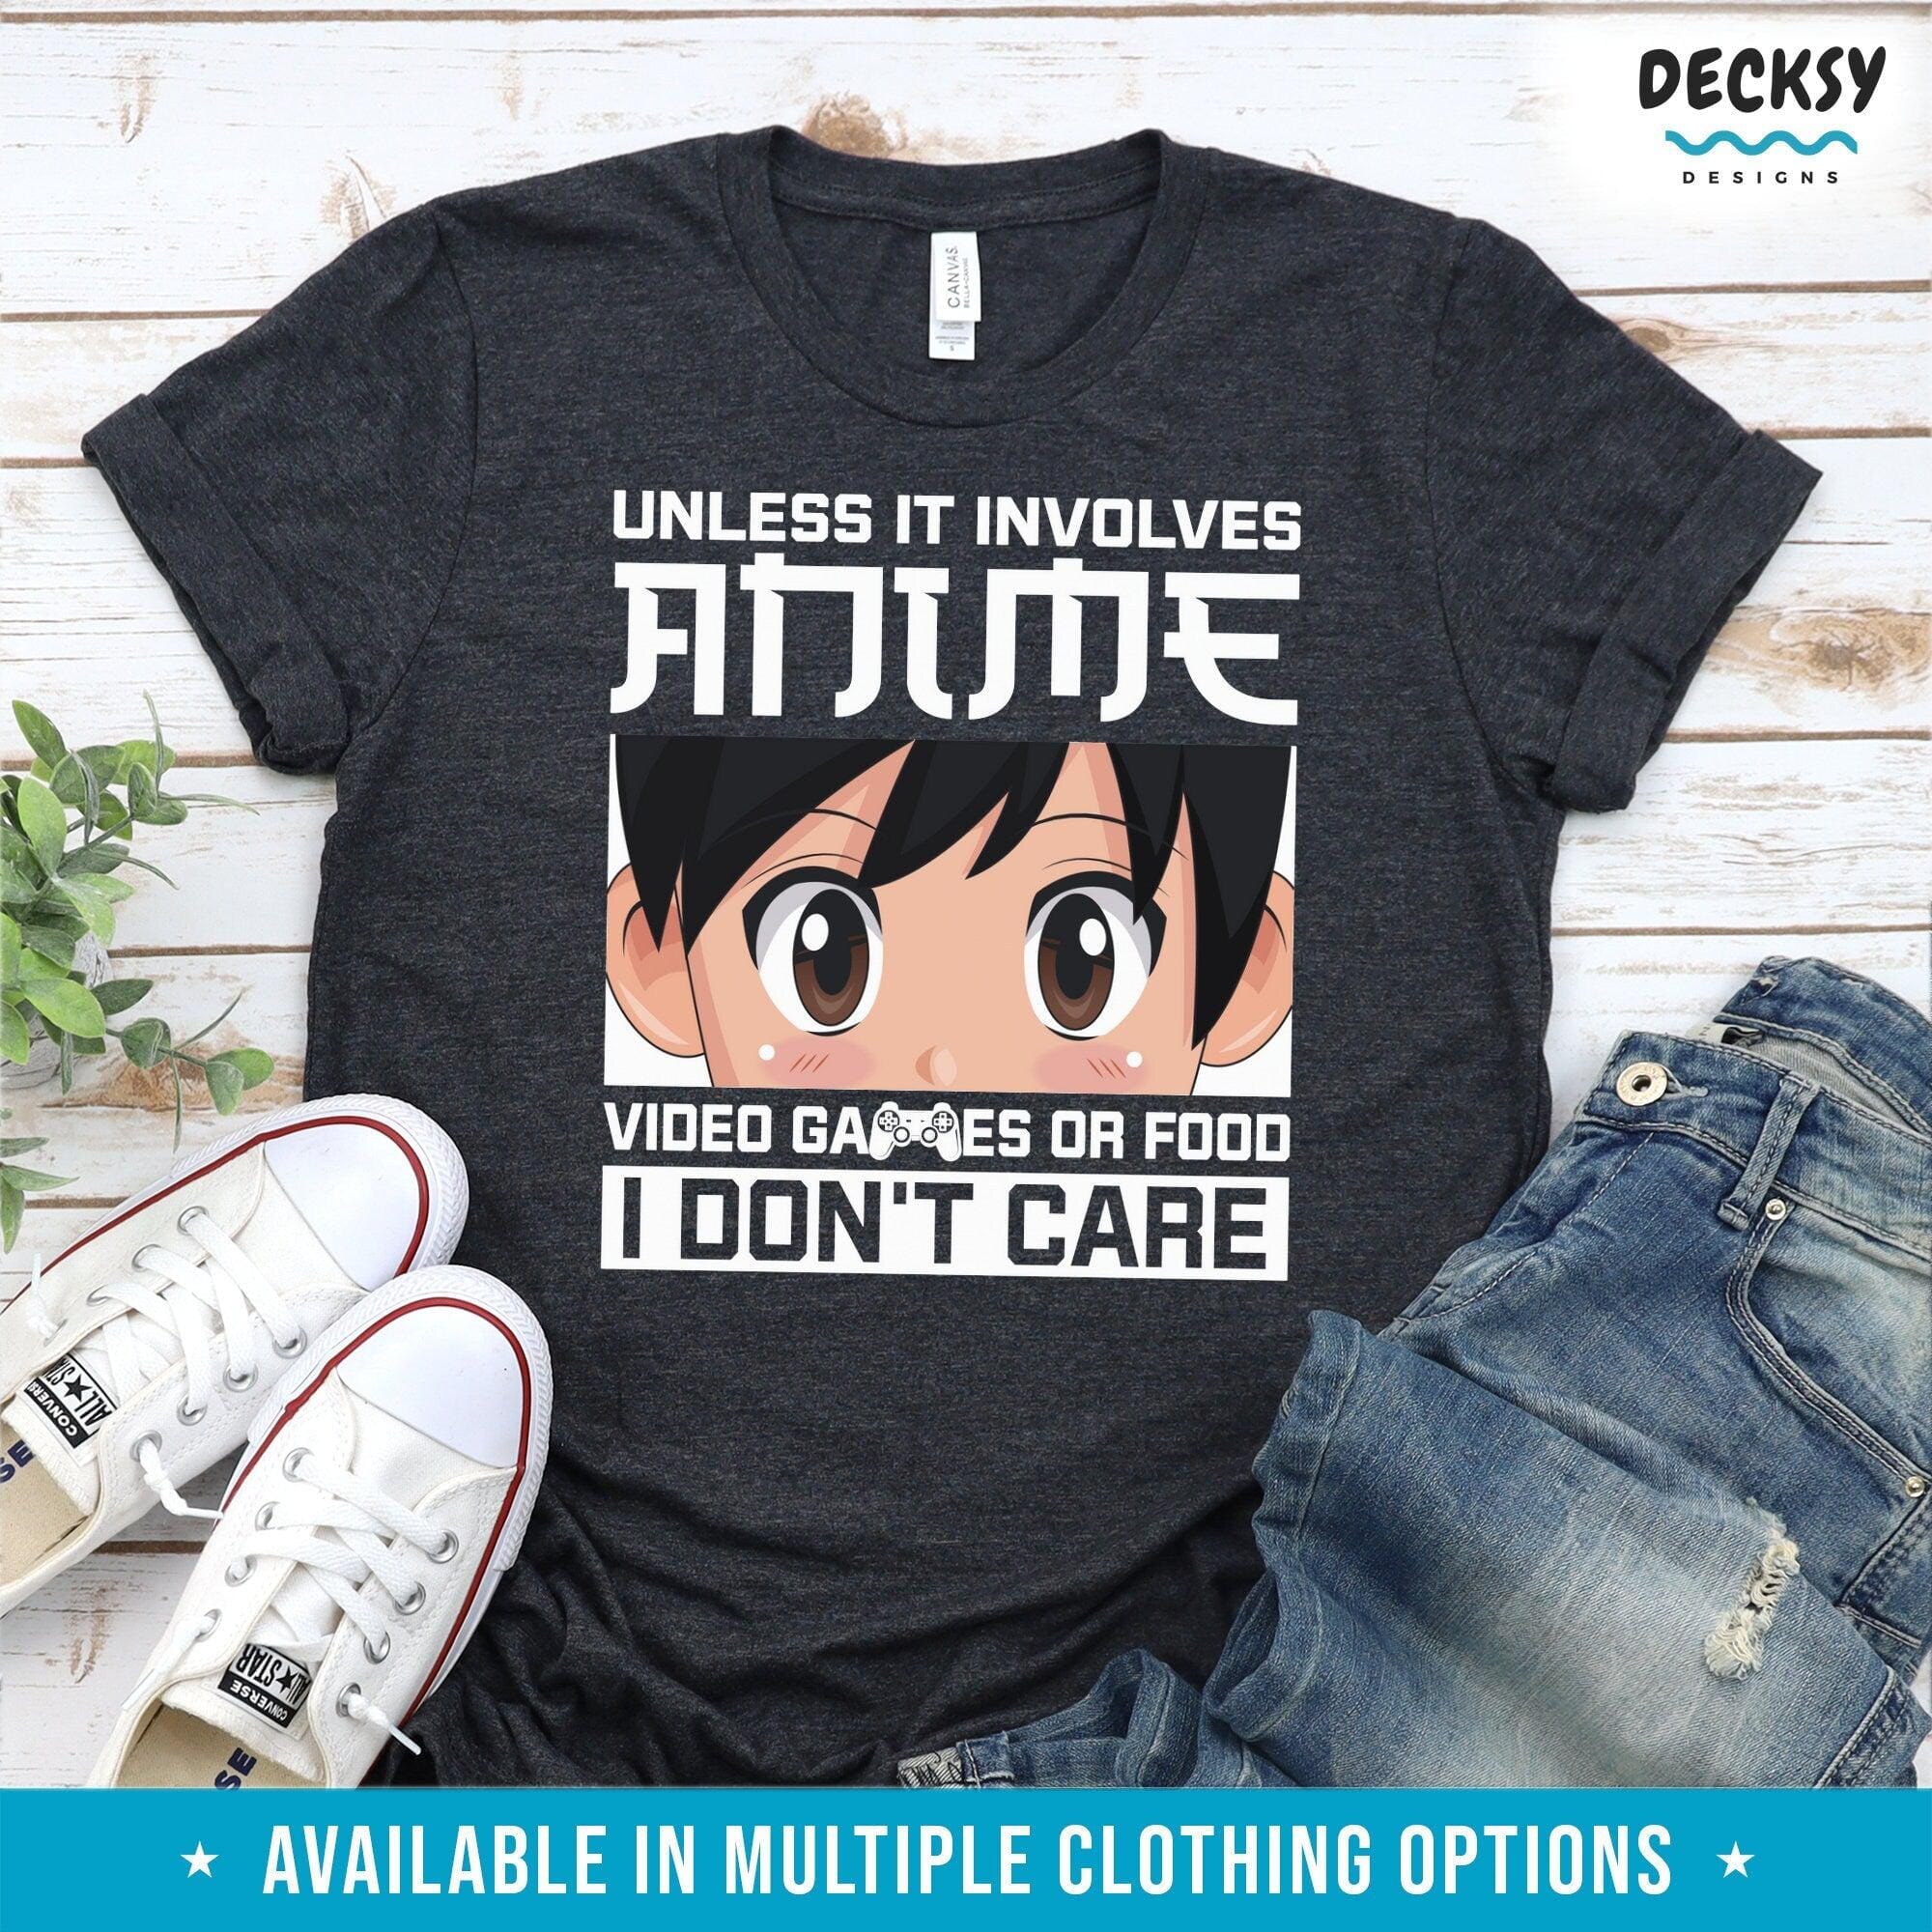 Anime Shirt, Gift For Anime Fan, Tshirts For Gamer-Clothing:Gender-Neutral Adult Clothing:Tops & Tees:T-shirts:Graphic Tees-DecksyDesigns